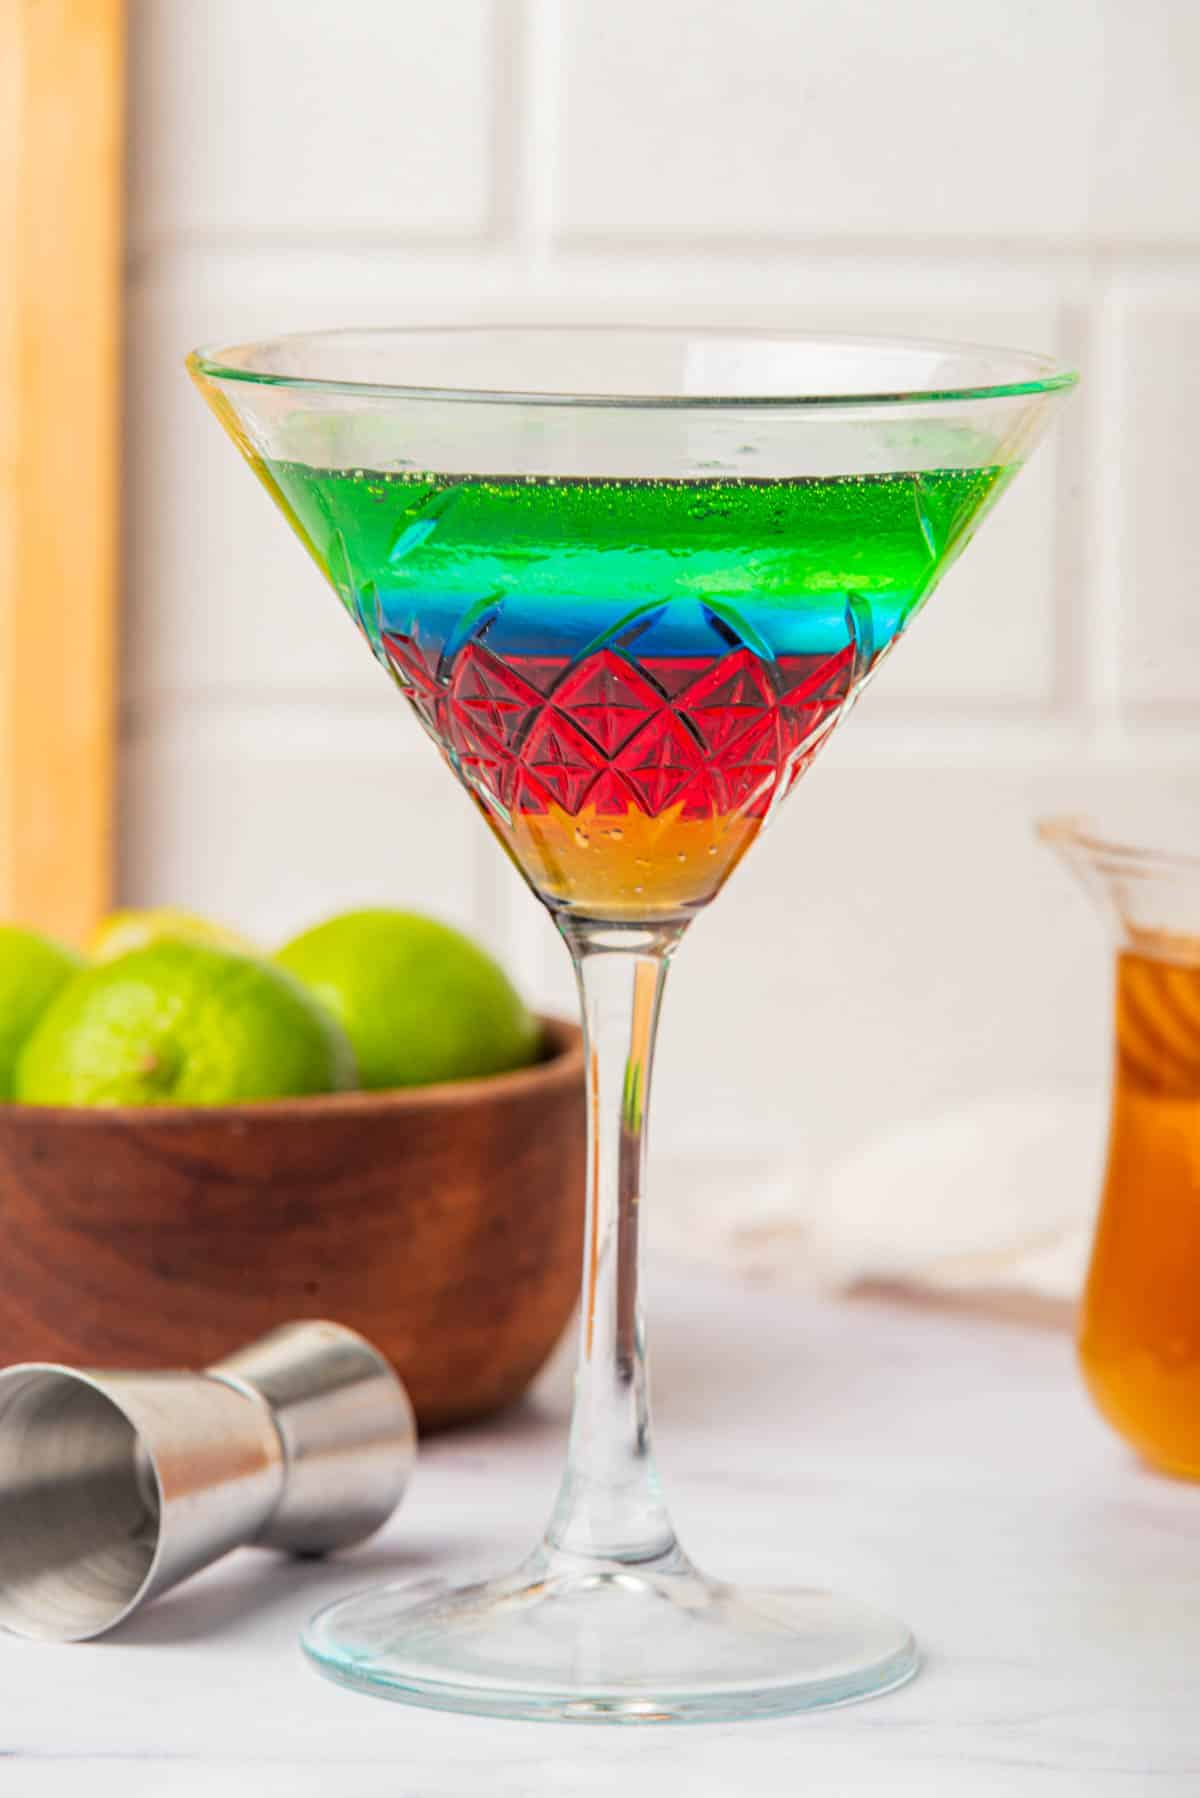 Martini glass with liquid in the colors of the Olympic Rings with a jigger on side, limes, bottles, and honey in background.